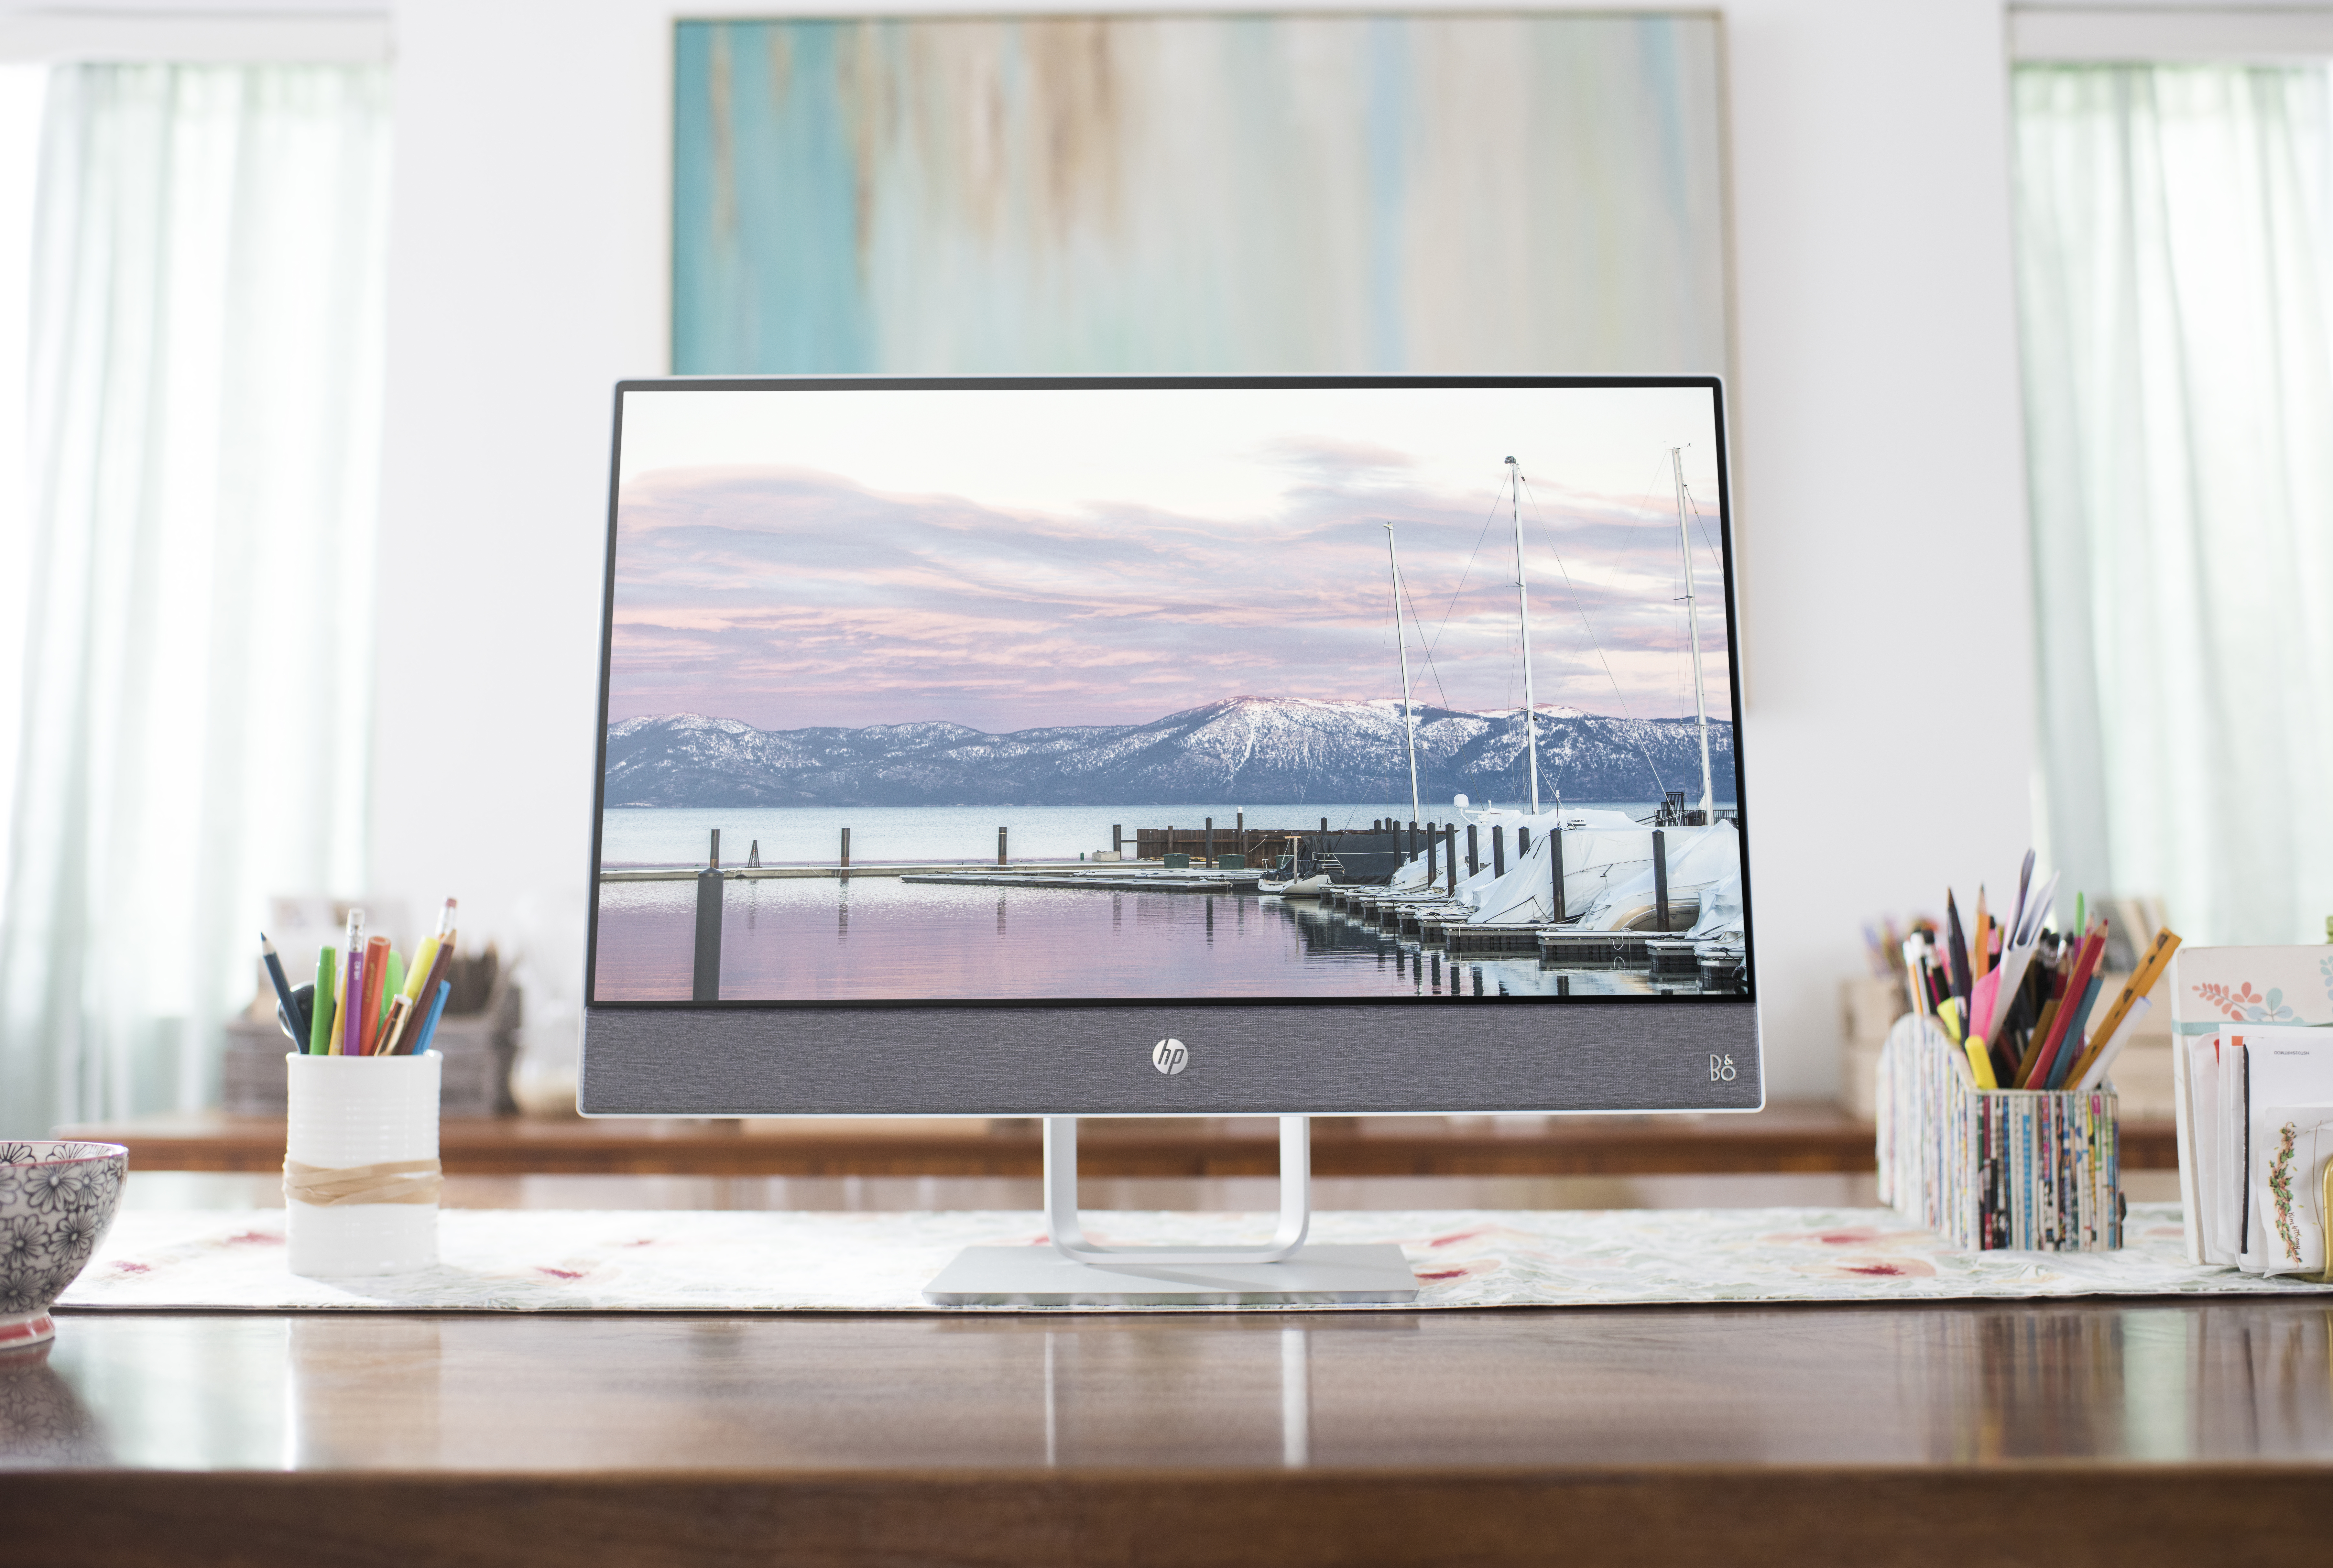 HP adds premium All-in-One devices with Windows 10